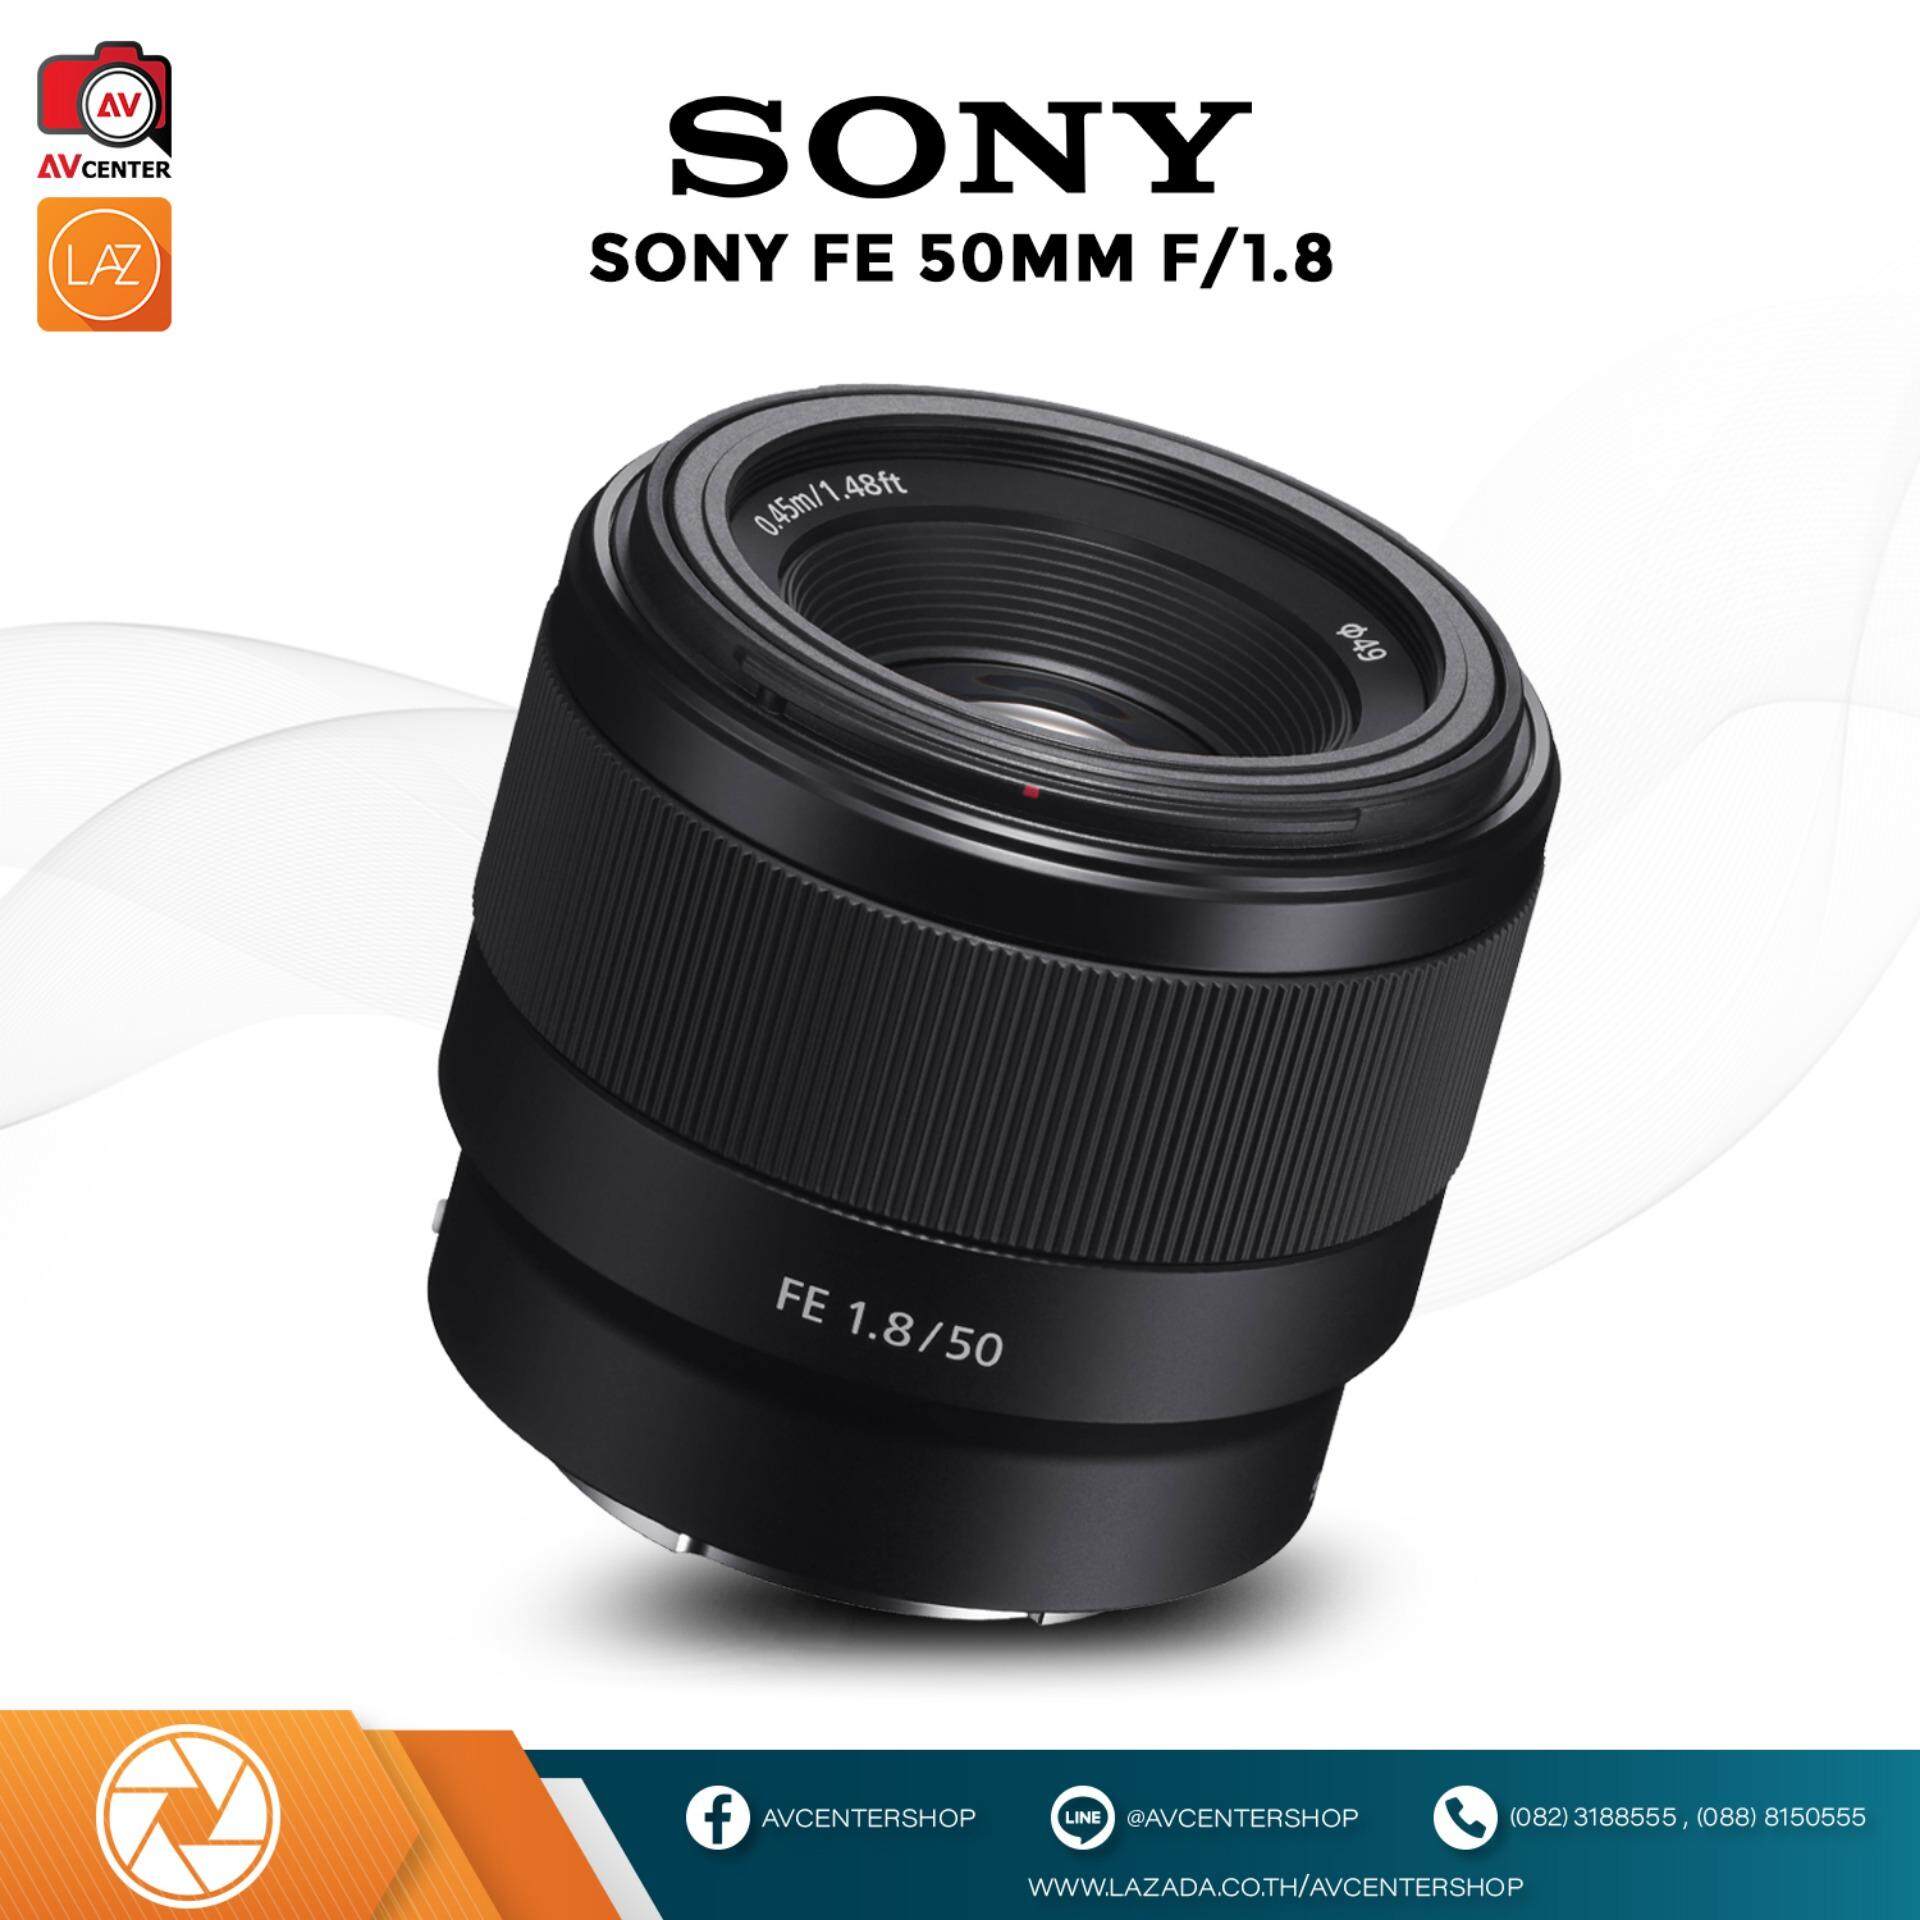 Sony FE 50 mm f/1.8 Lens E-Mount (Full Frame) (รับประกัน 1ปี By AVcentershop)